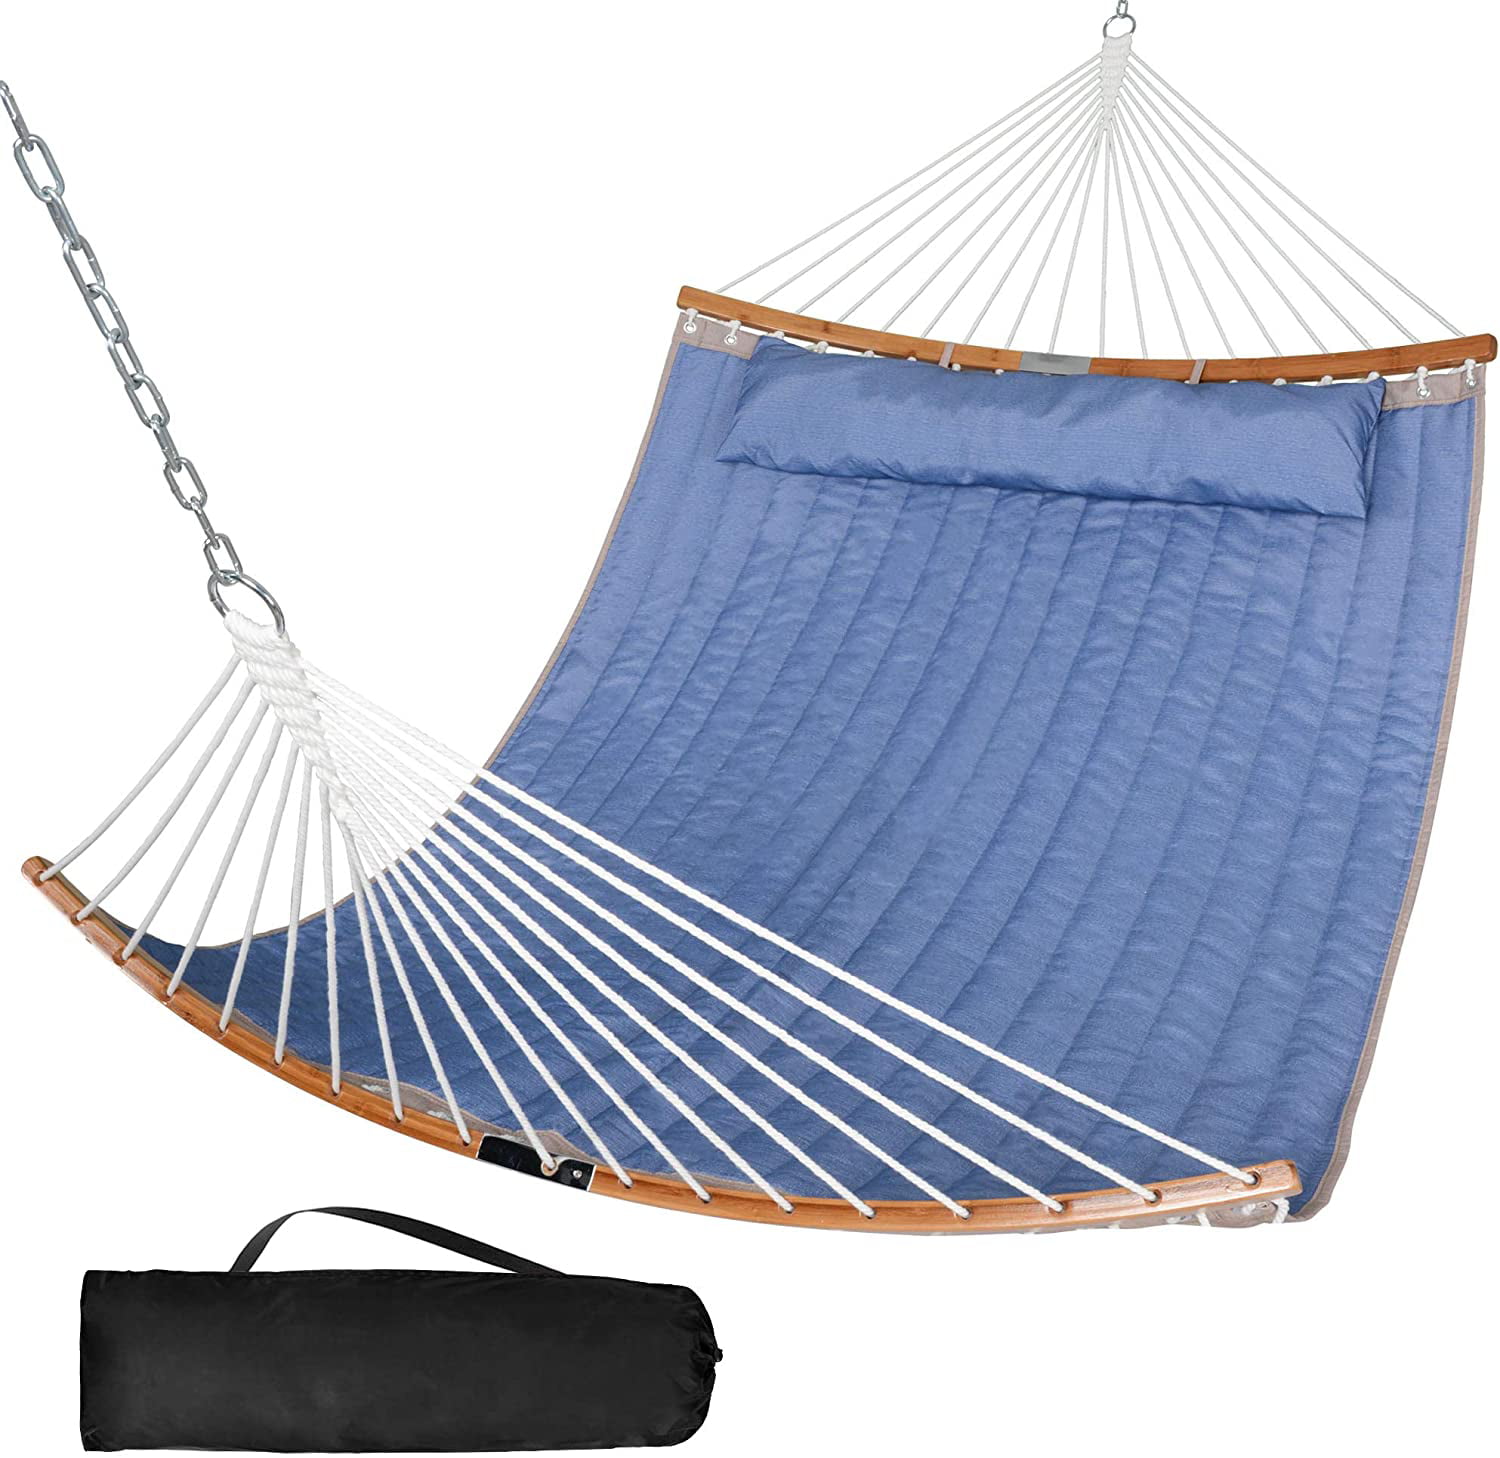 Camping Hammock 2 Person Canvas Hammock 450lbs with Ropes Colorful Cotton Camping Bed 74.8 Long X 59 Wide Swing Bed for Outdoor Indoor Travel Camping Backpacking Blue Hammock 